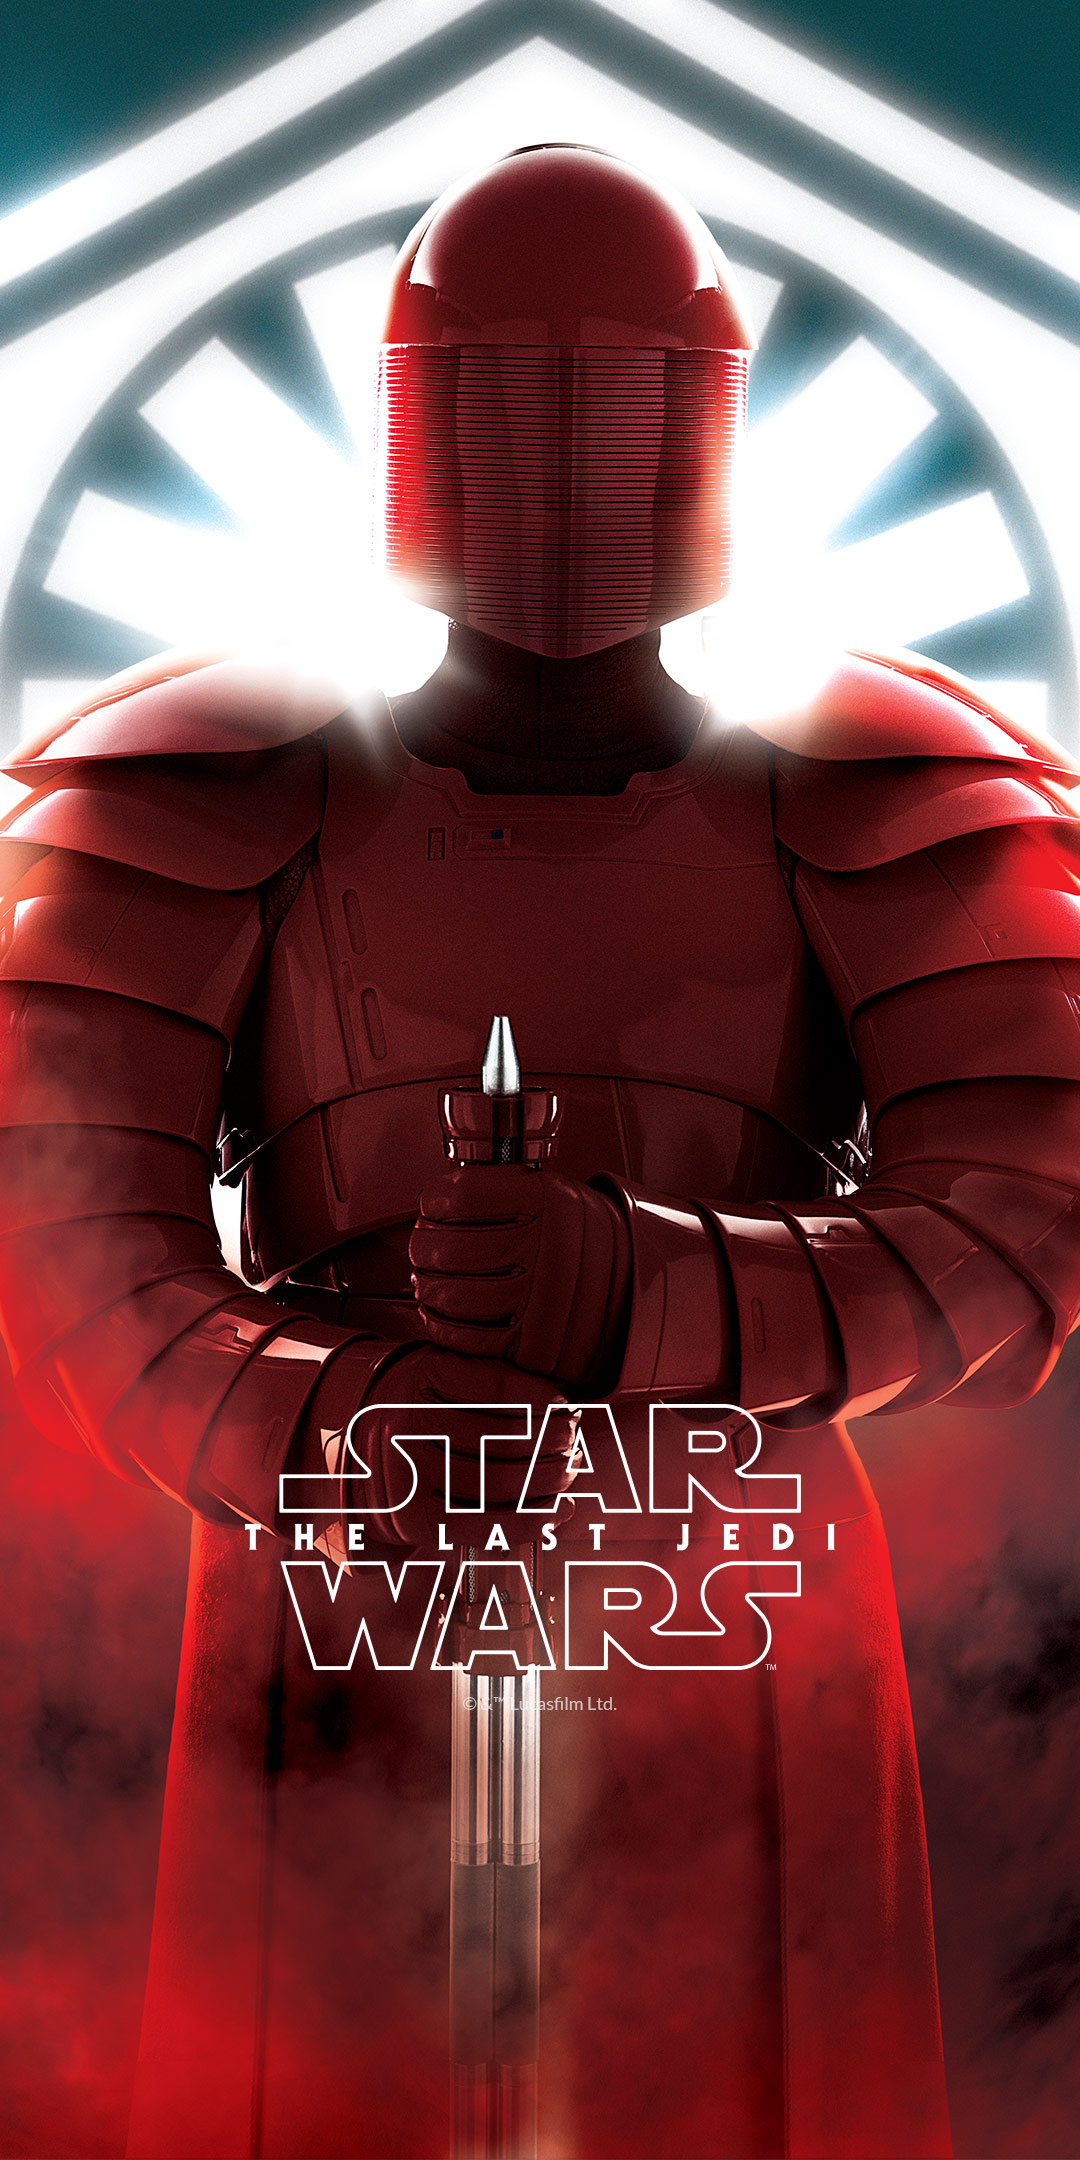 The Wallpapers Are Sized To The Oneplus 5t's Display, - Star Wars Elite Praetorian Guard , HD Wallpaper & Backgrounds